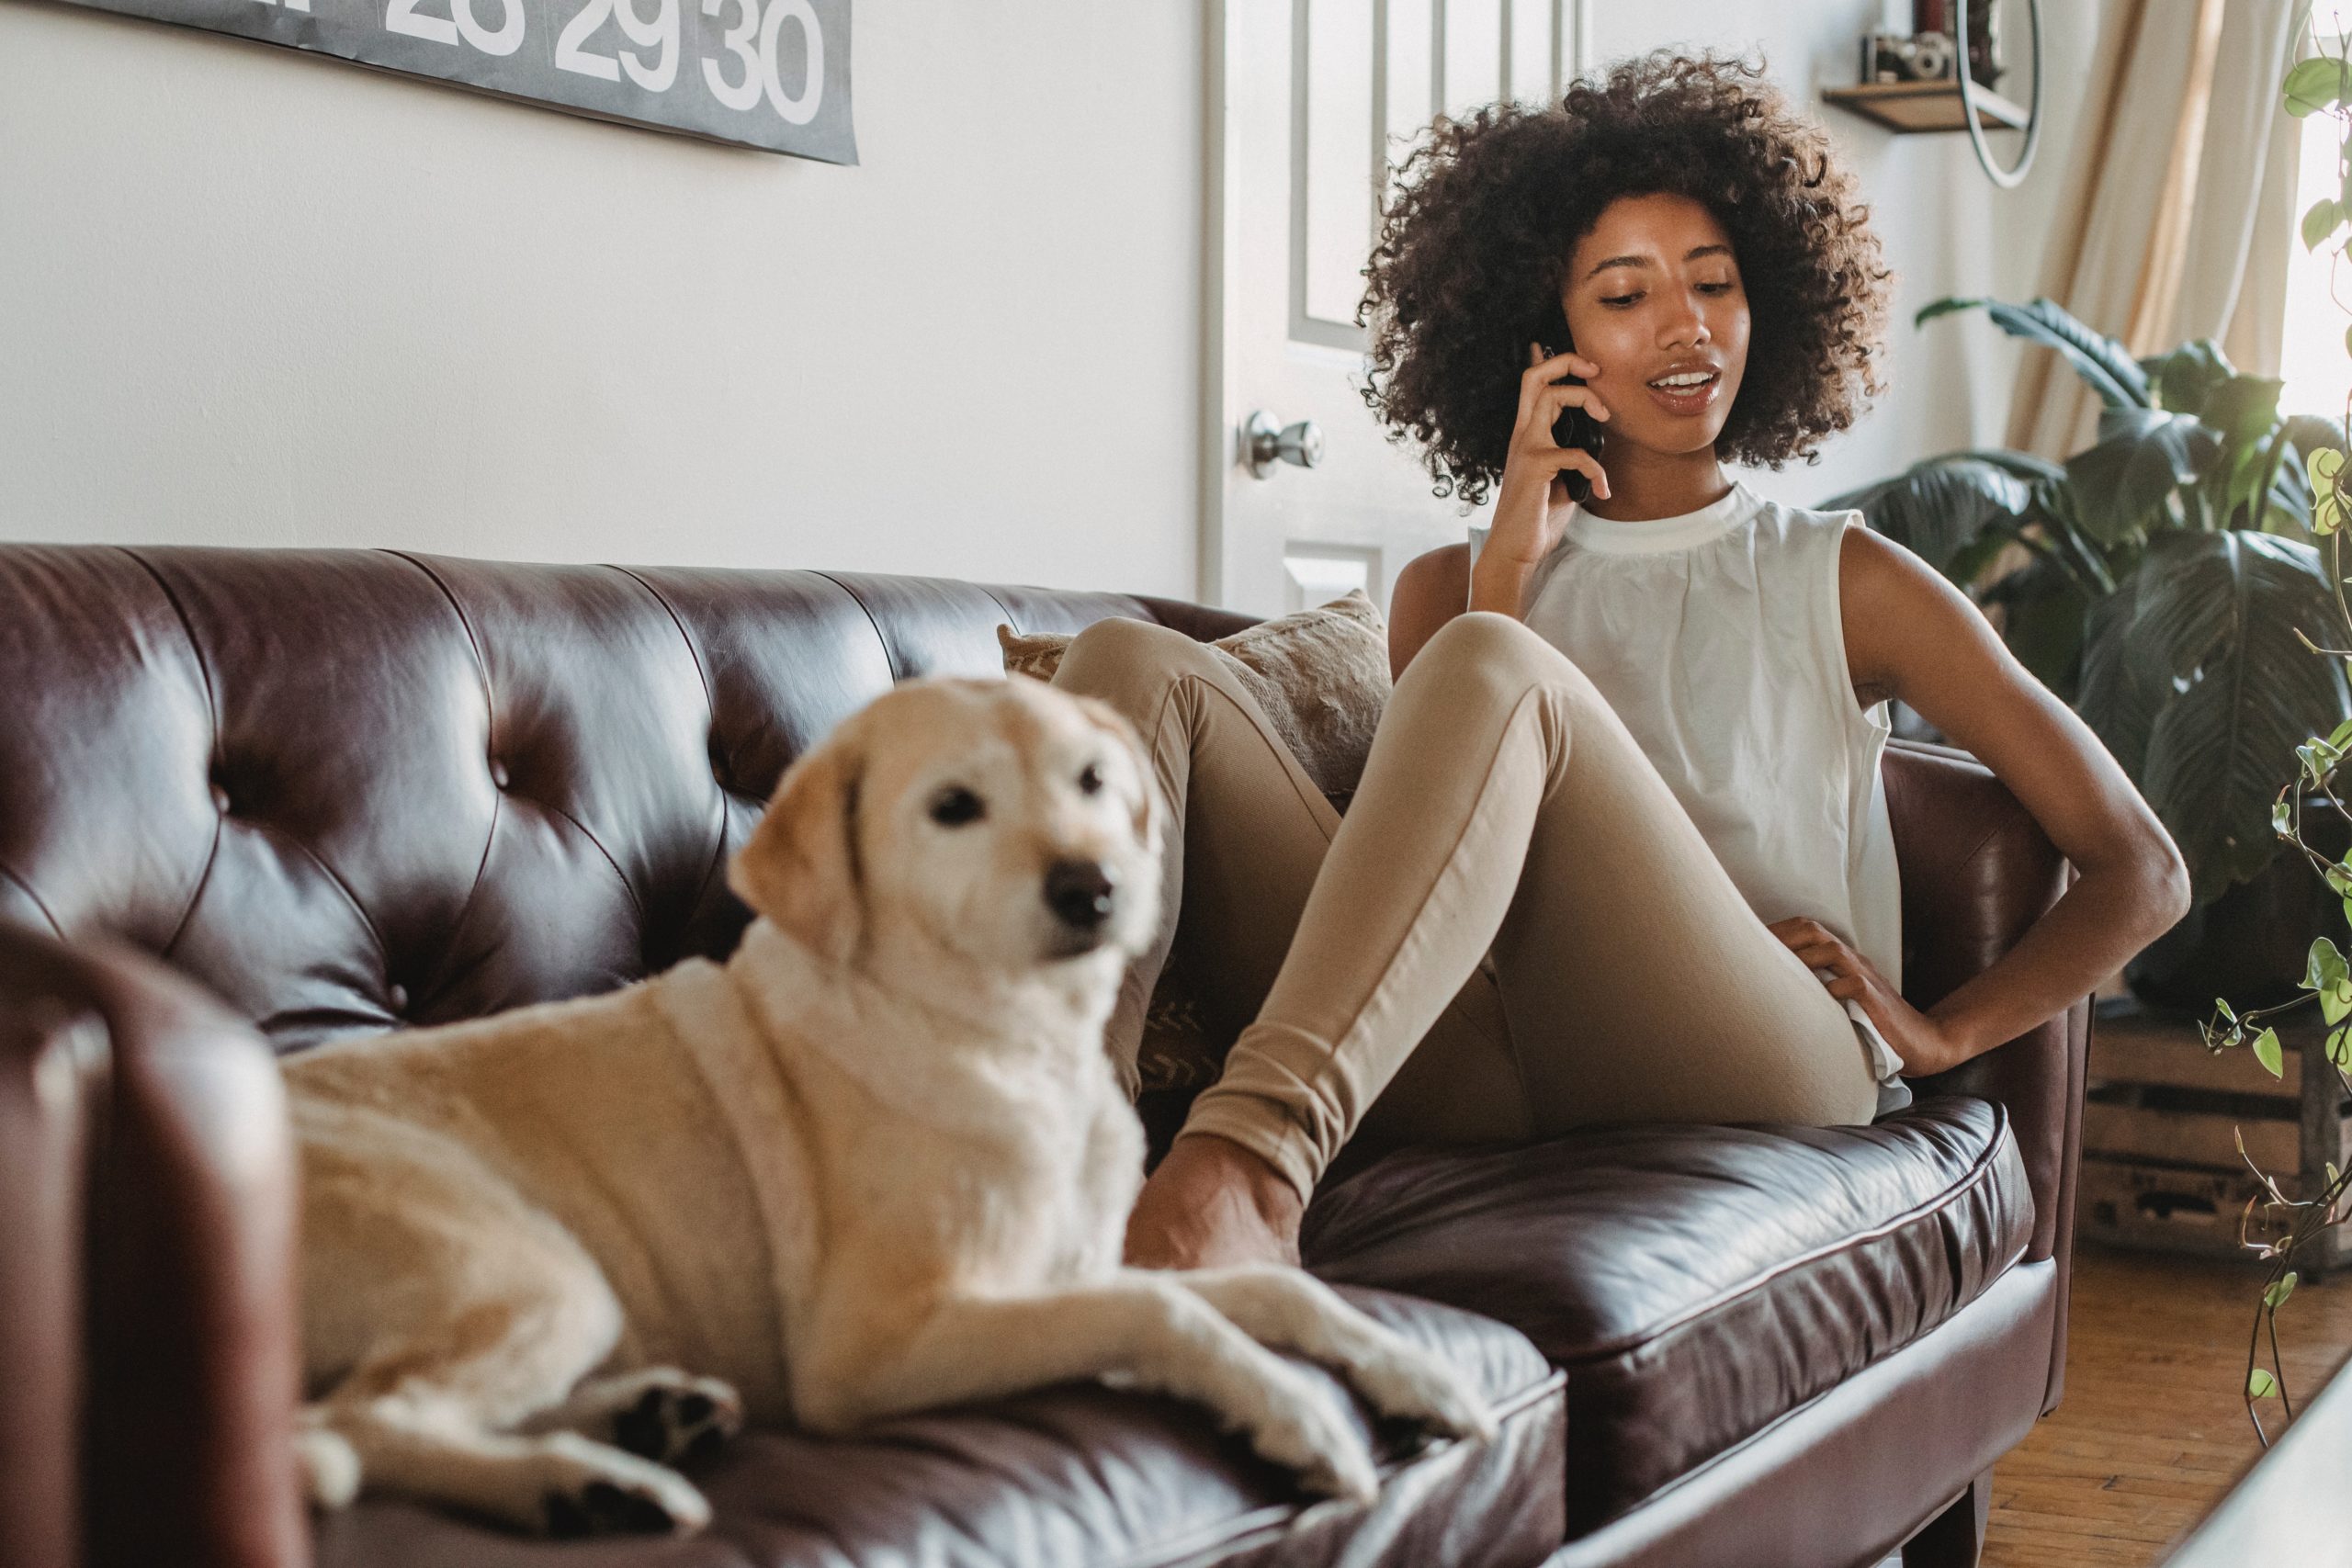 Black women talking on the phone while sitting on the couch with her dog